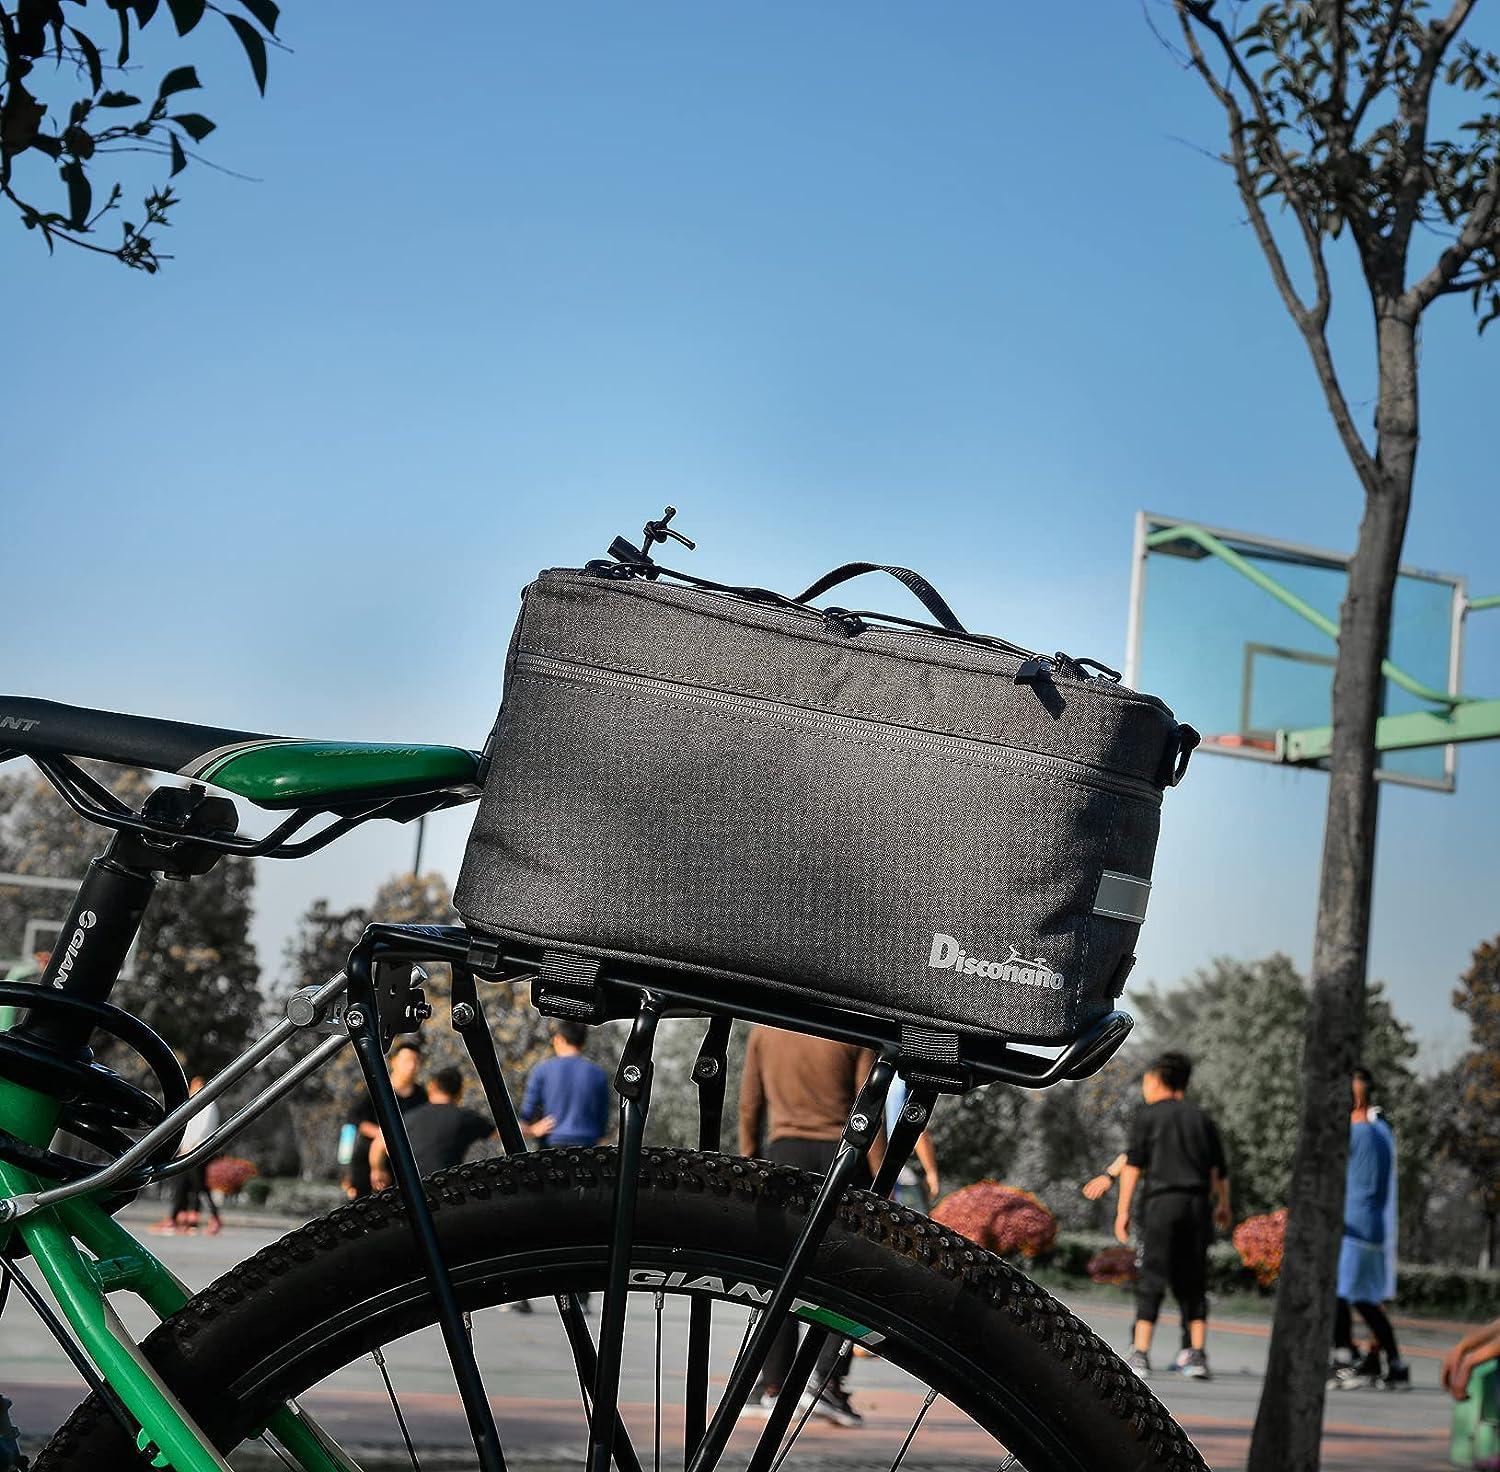 Disconano 8L Multifunctional Bicycle Rear Rack Bag Can Carry  Basketball/Football/Helmet, Can Be Used as Hand Bag/Ice Bag/Lunch Bag Gray